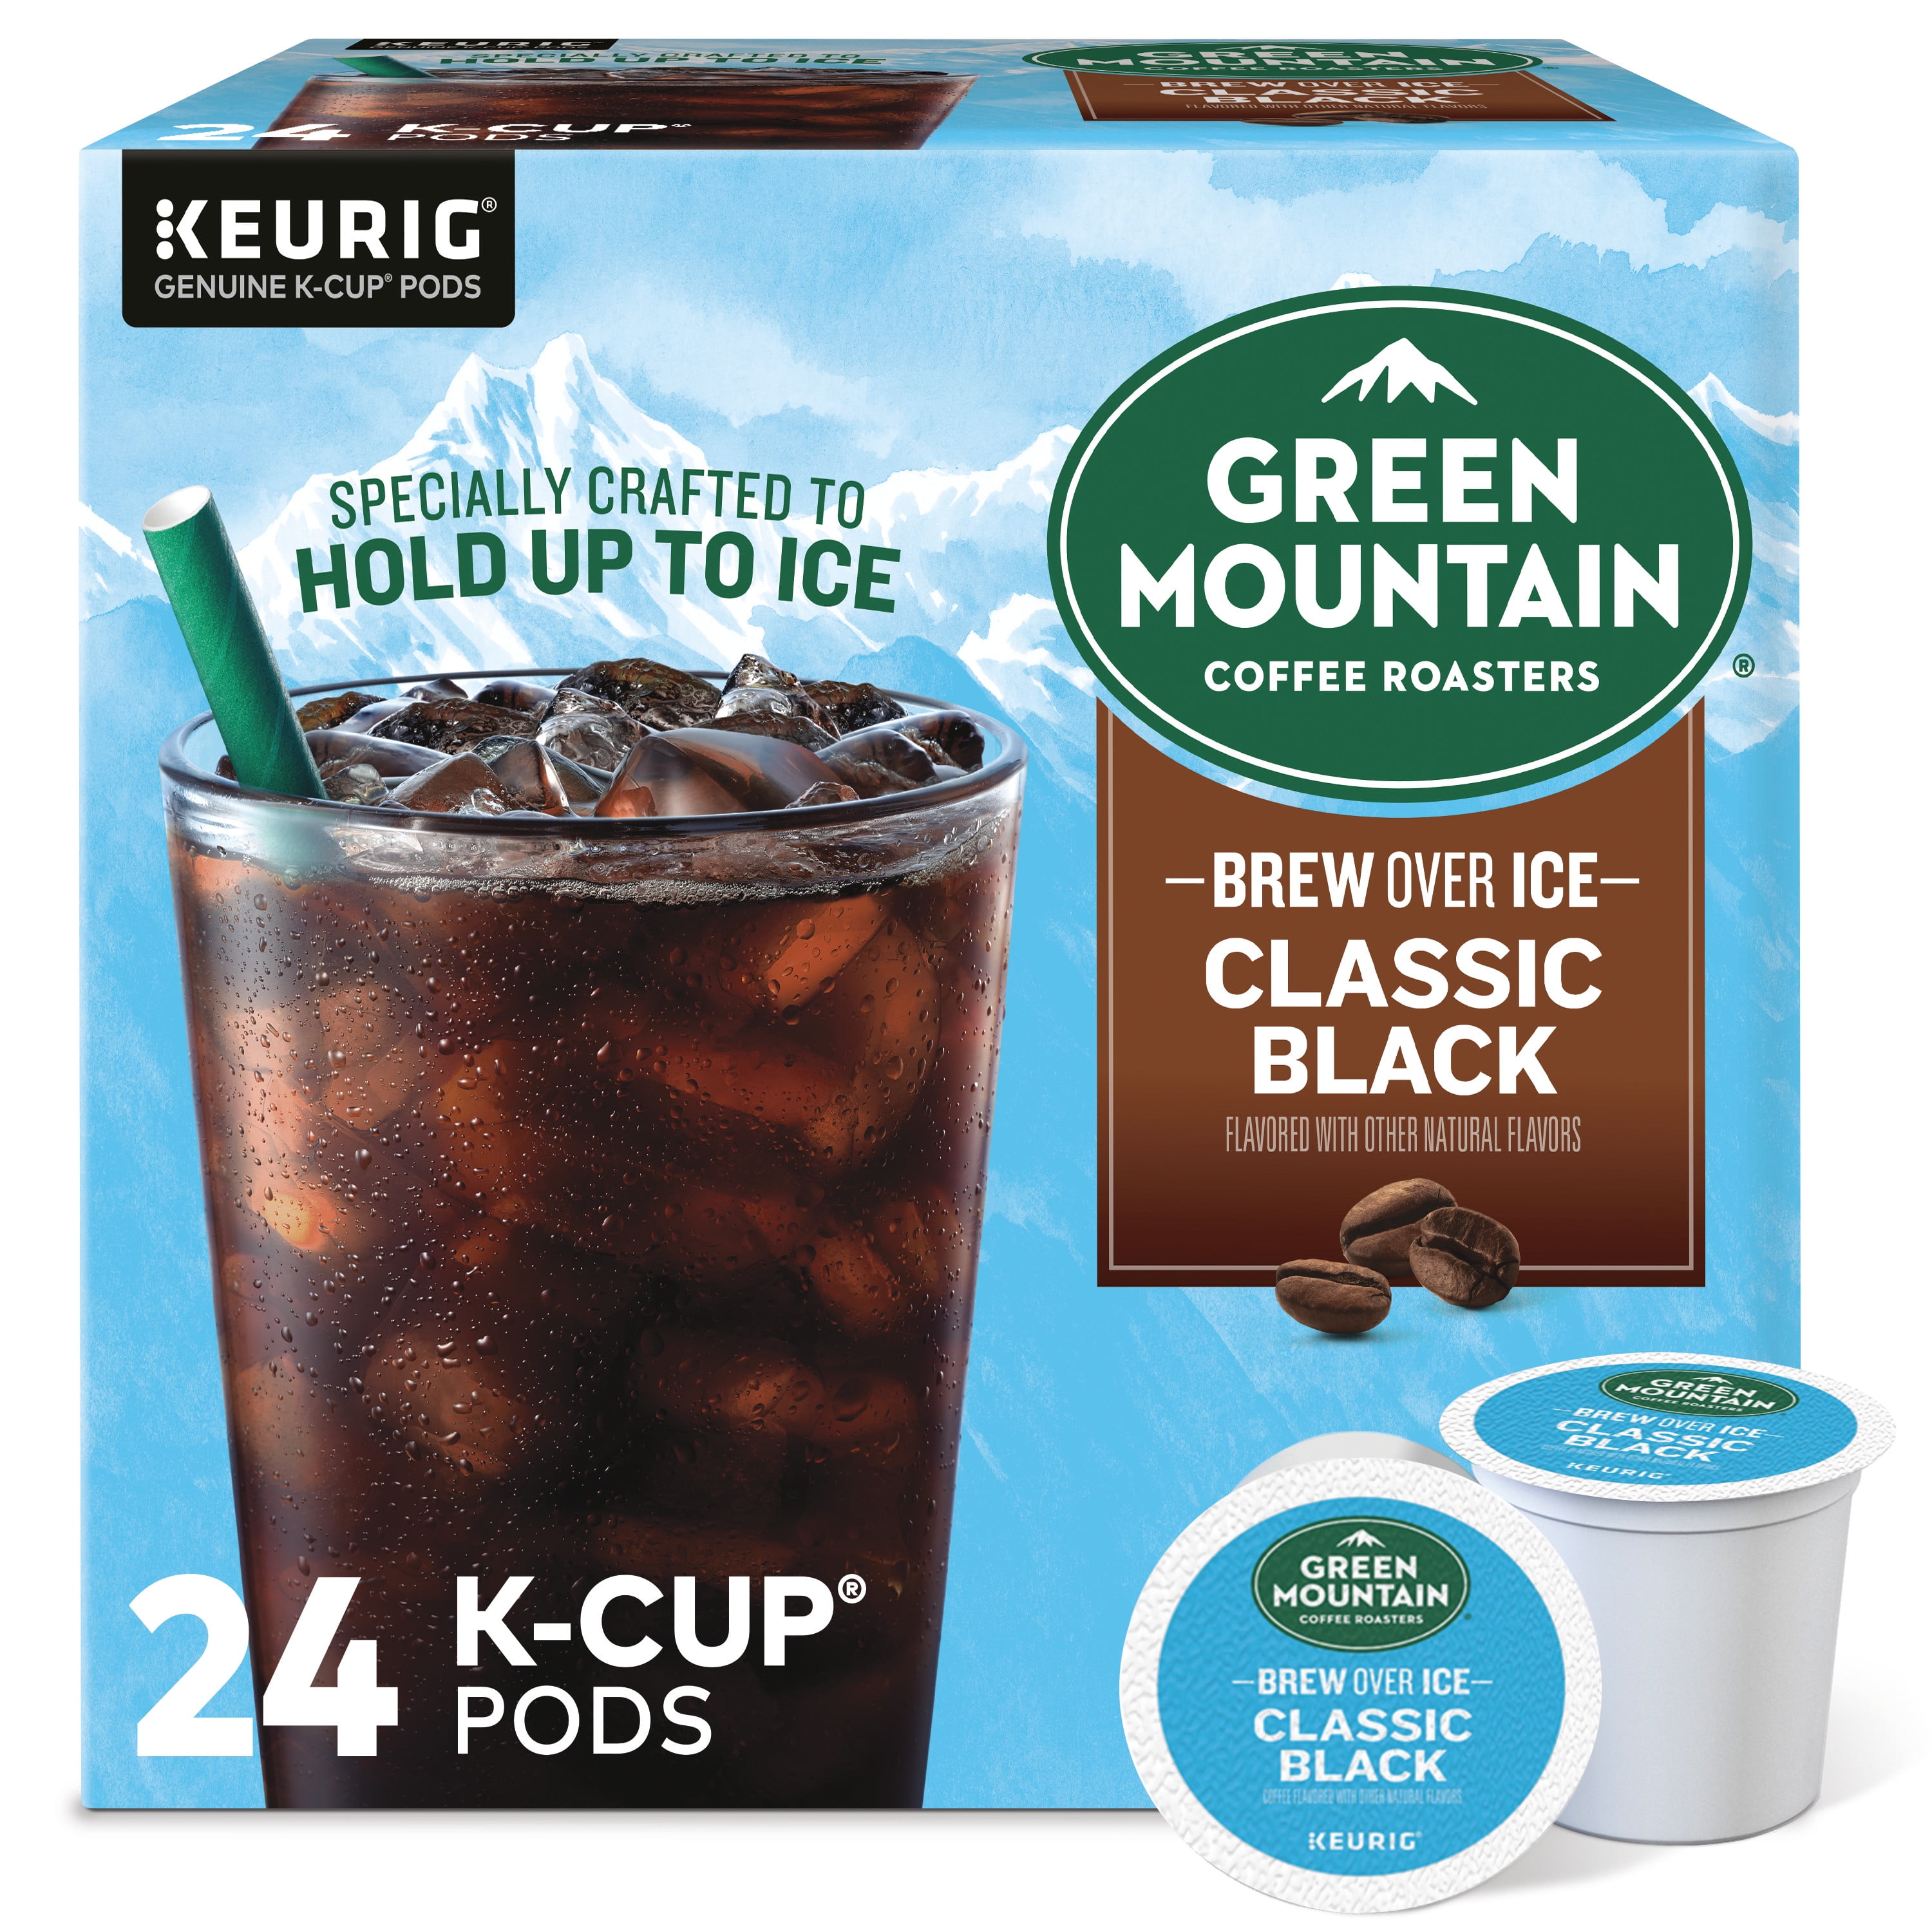 Havn morgue At øge Green Mountain Coffee Roasters Brew Over Ice Classic Black, Single Serve  Keurig K-Cup Pods, Medium Roast Iced Coffee, 24 Ct - Walmart.com